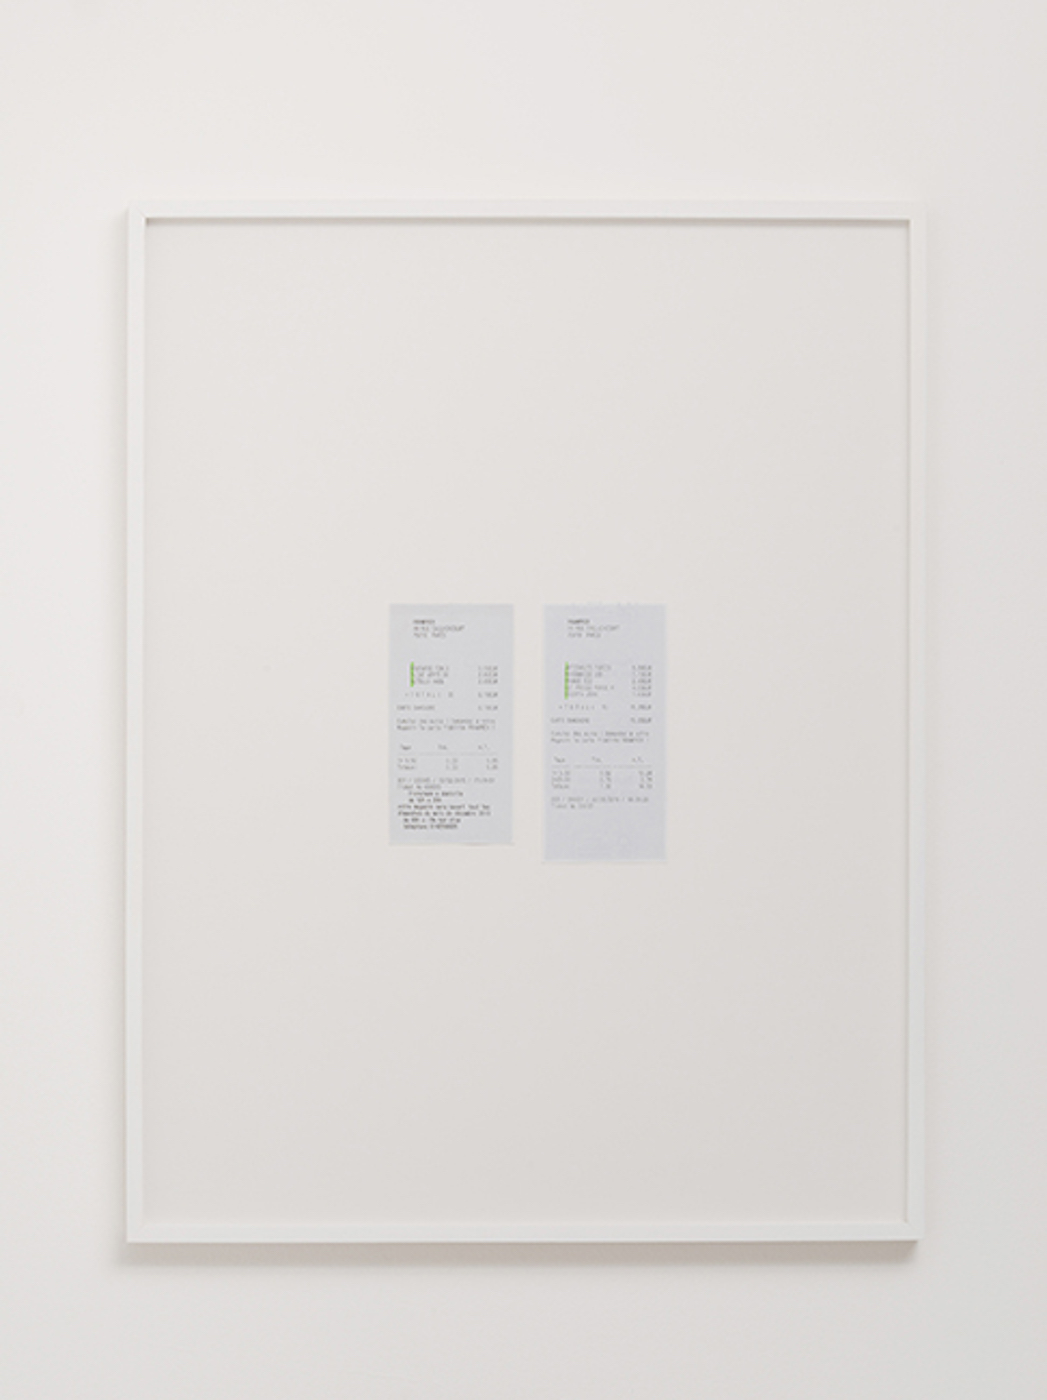  Mon Amour 2012 – 2015 Supermarket receipts, highlighter Dimensions variable   Products purchased in a Parisian supermarket are chosen in a very precise way and disposed at the cash machine accordingly to reveal a secret message: Mon Amour. 